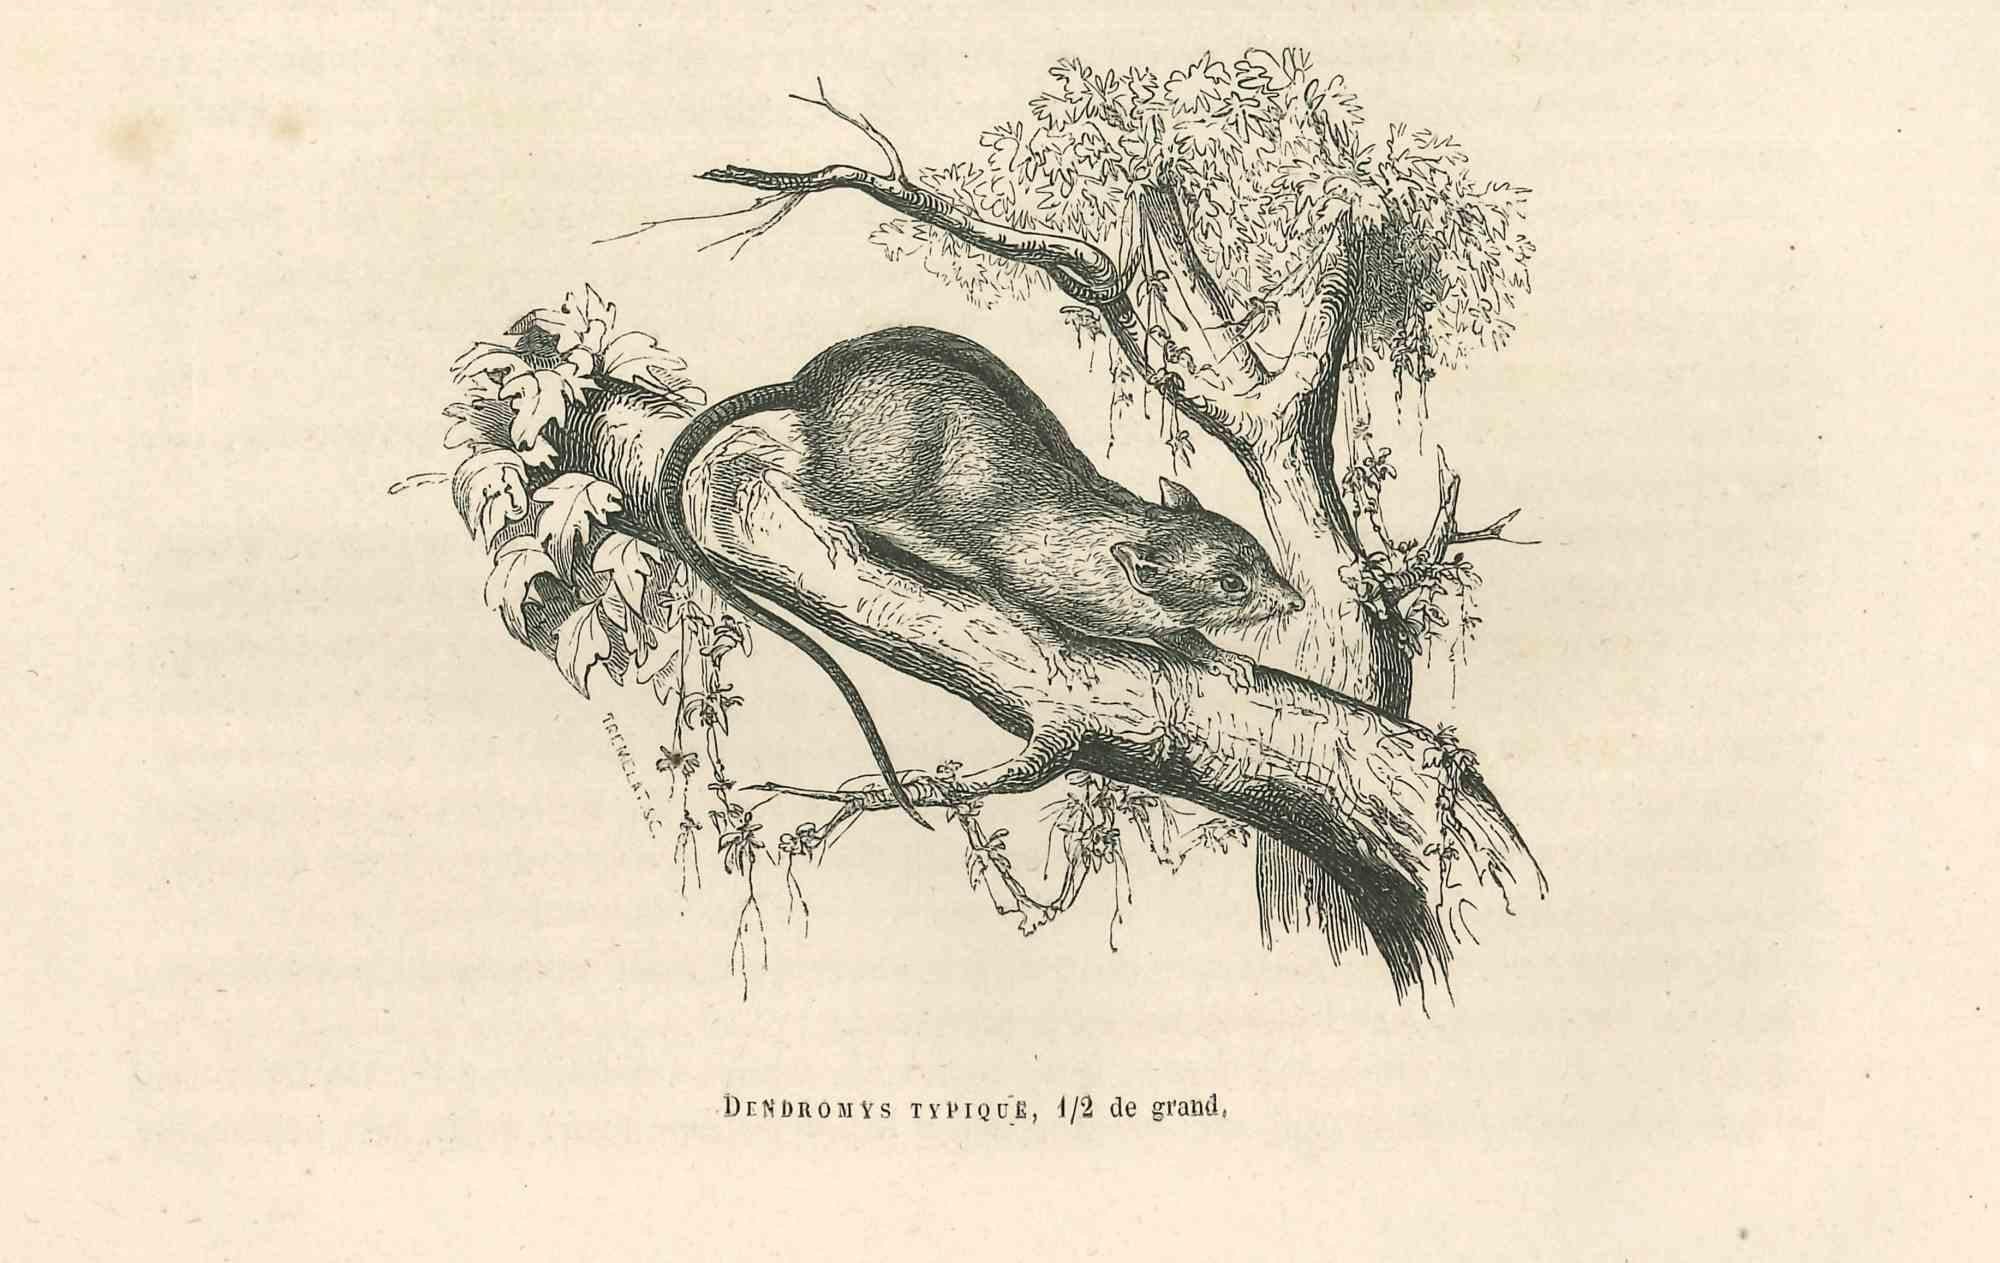 The Mouse is an original lithograph on ivory-colored paper, realized by Paul Gervais (1816-1879). The artwork is from The Series of "Les Trois Règnes de la Nature", and was published in 1854.

Good conditions with minor Stain.

Titled on the lower.